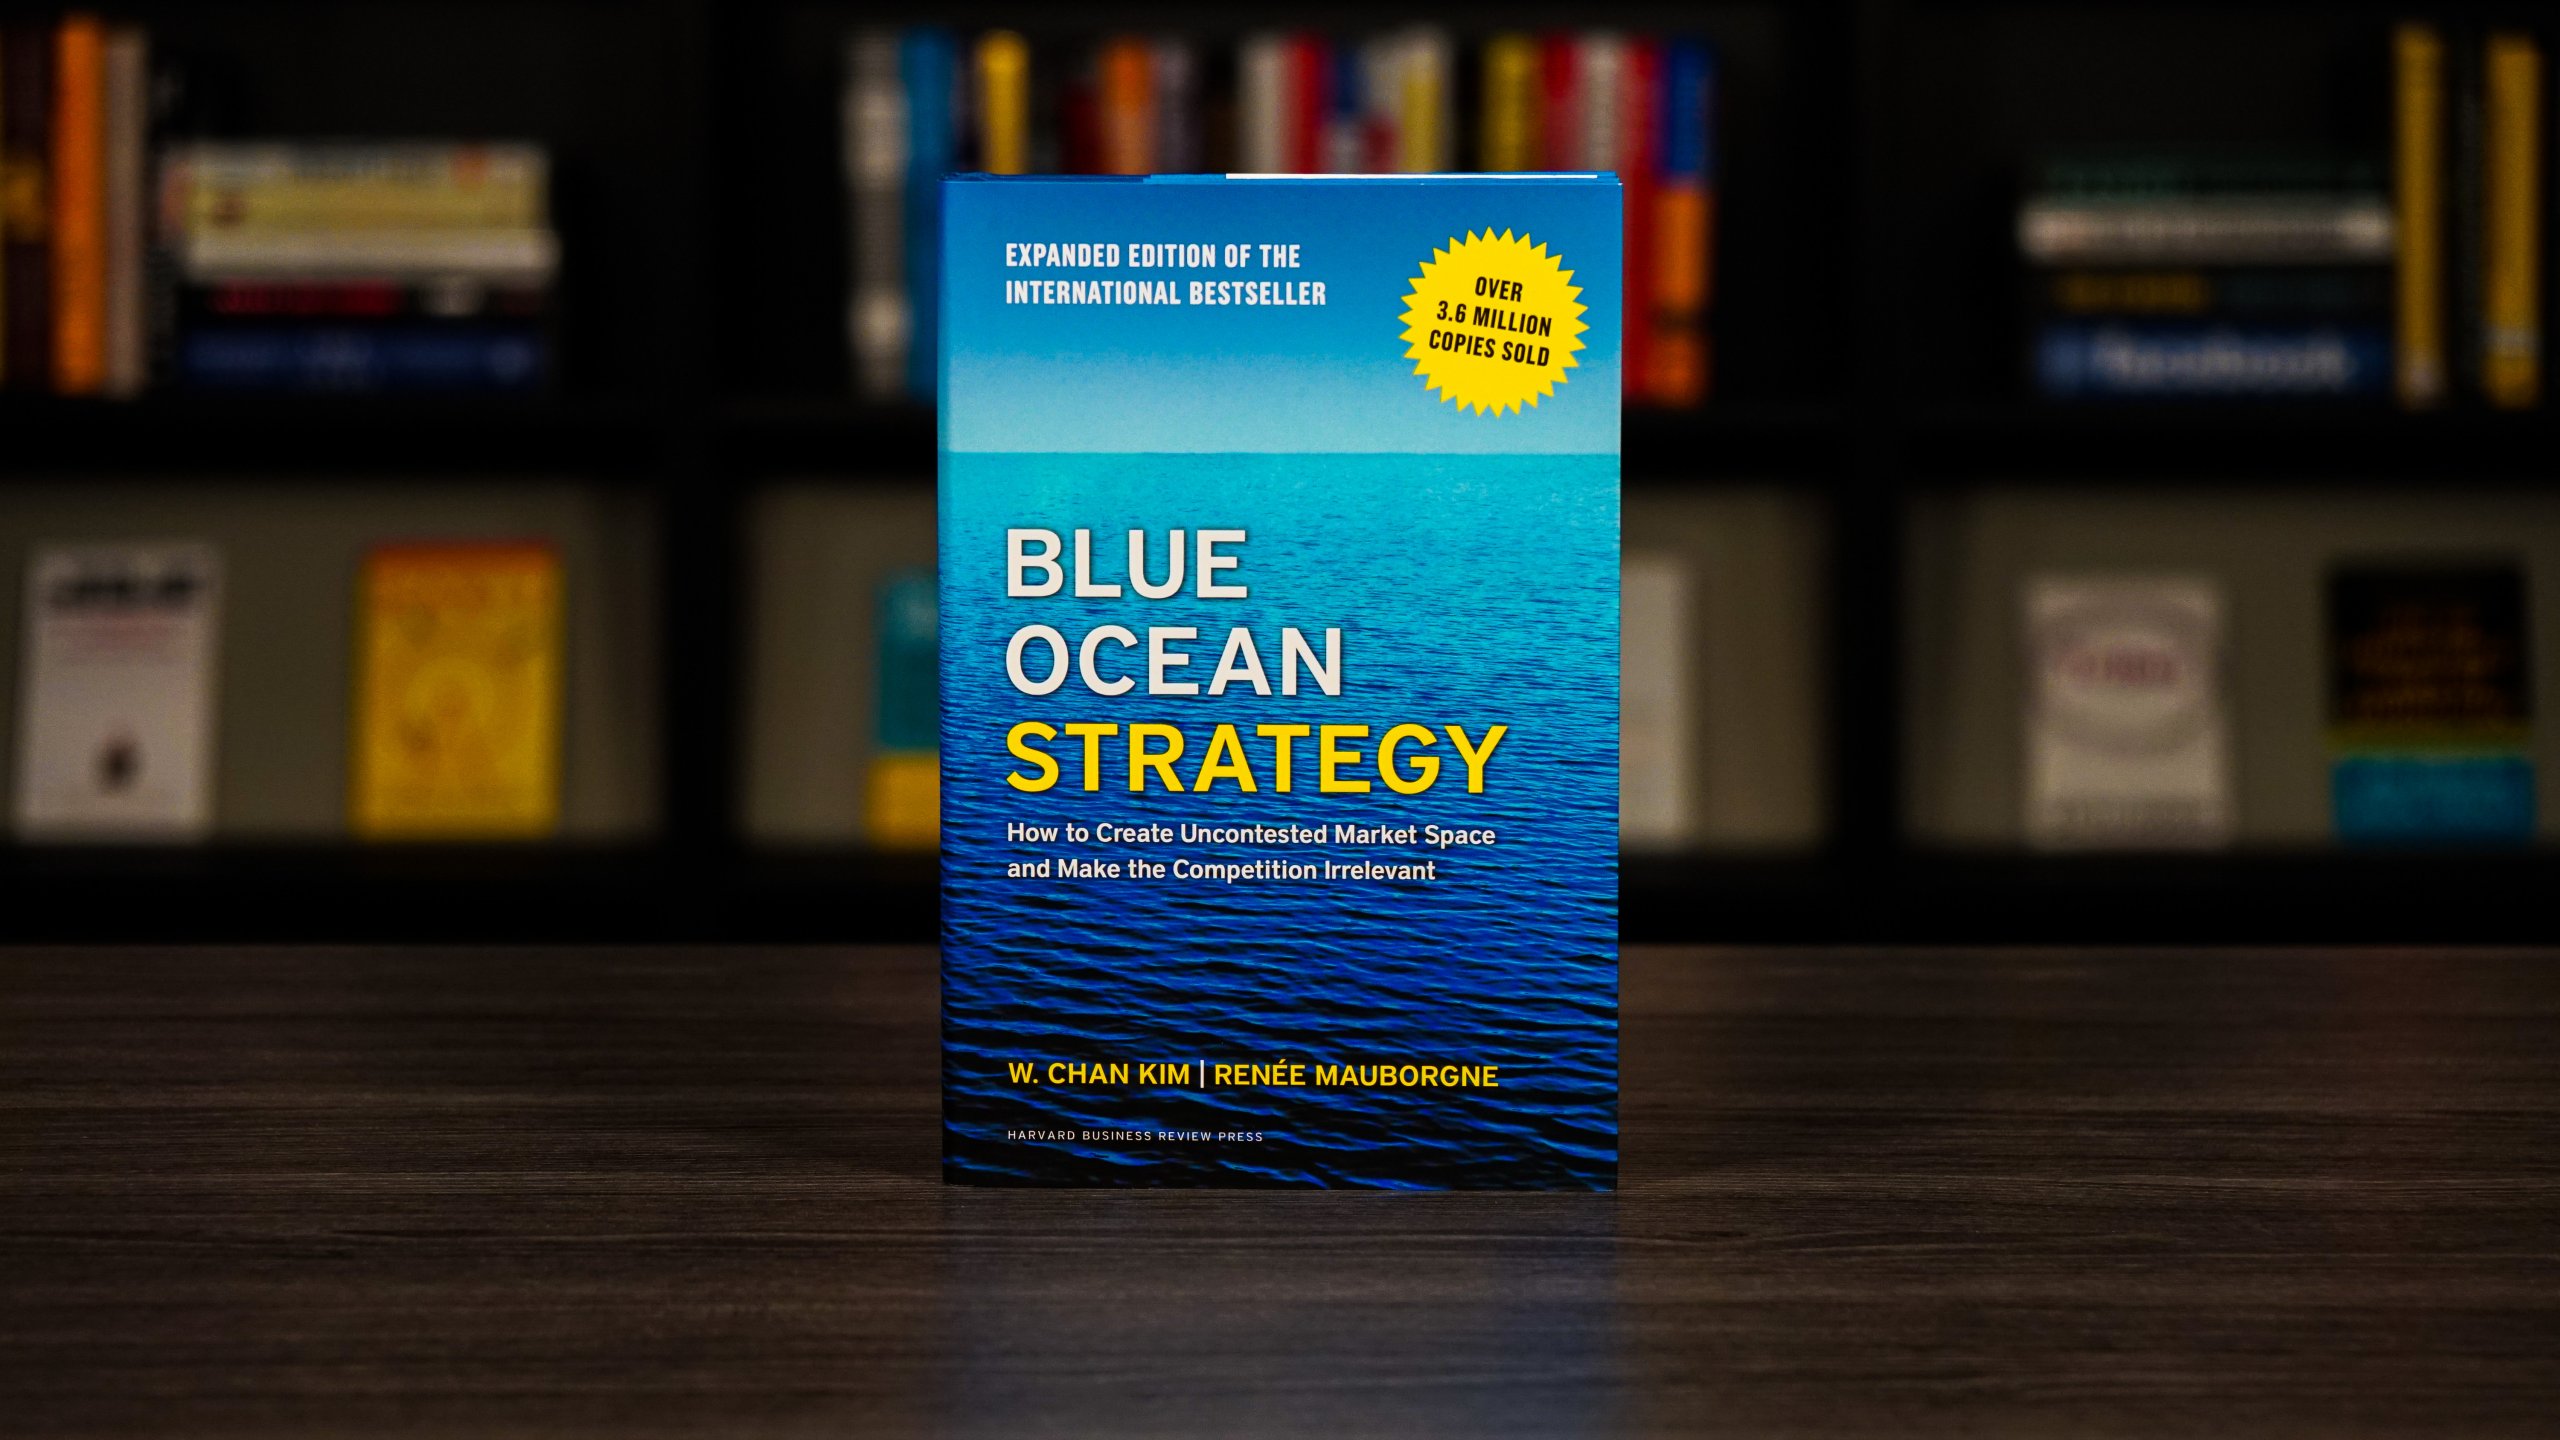 Blue Ocean Strategy for Hair Salons: Offering Innovative Services and Products - wide 2